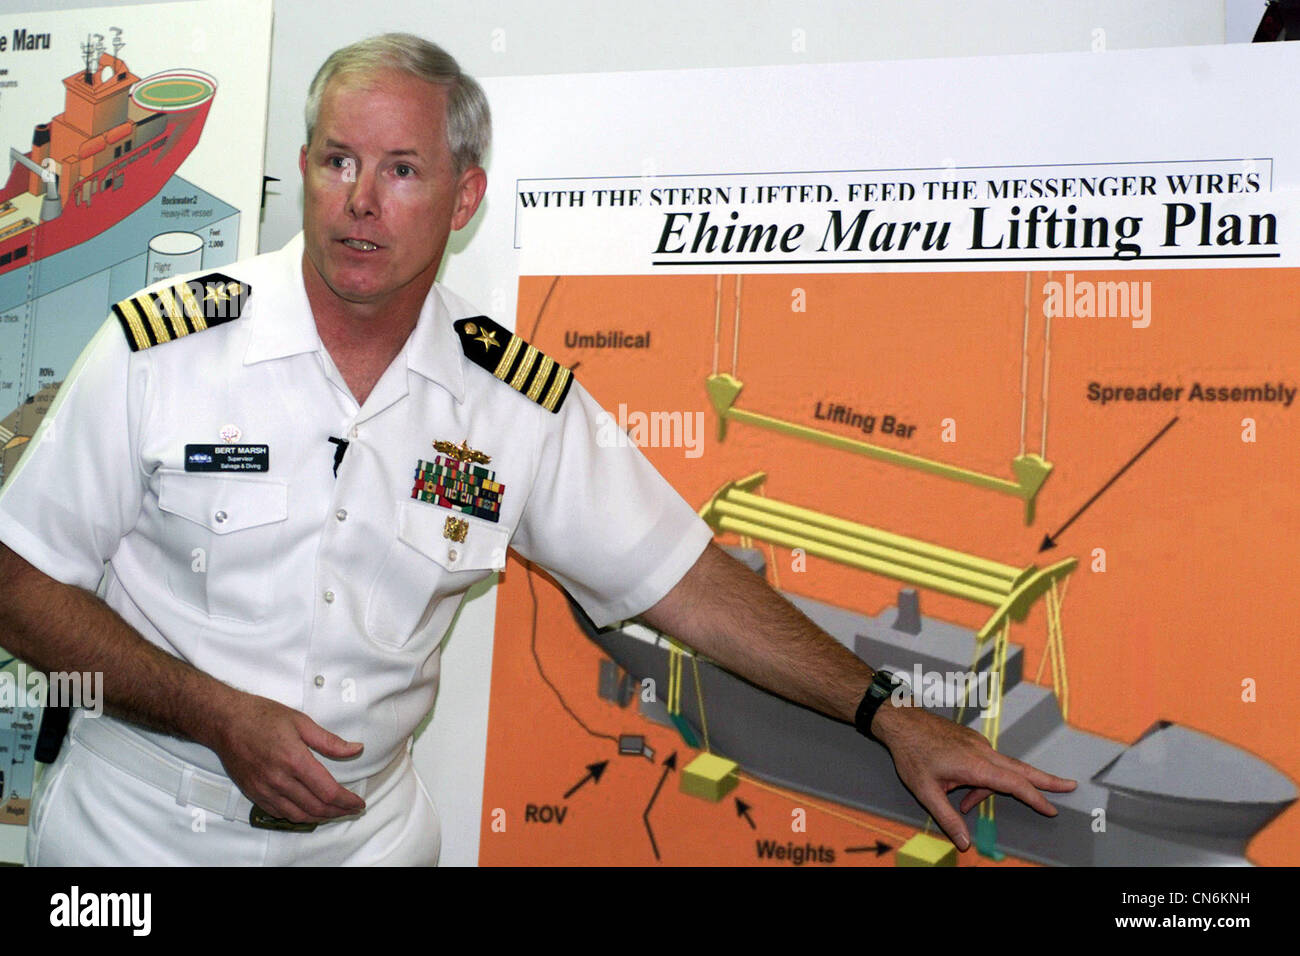 US Navy (USN) Captain (CAPT) Bert Marsh, Director of Ocean Engineering and Supervisor of Salvage and Diving at the Naval Sea Systems Command, uses a chart to describe the lifting process for the Japanese fishing vessel Ehime Maru, during a press briefing. Stock Photo